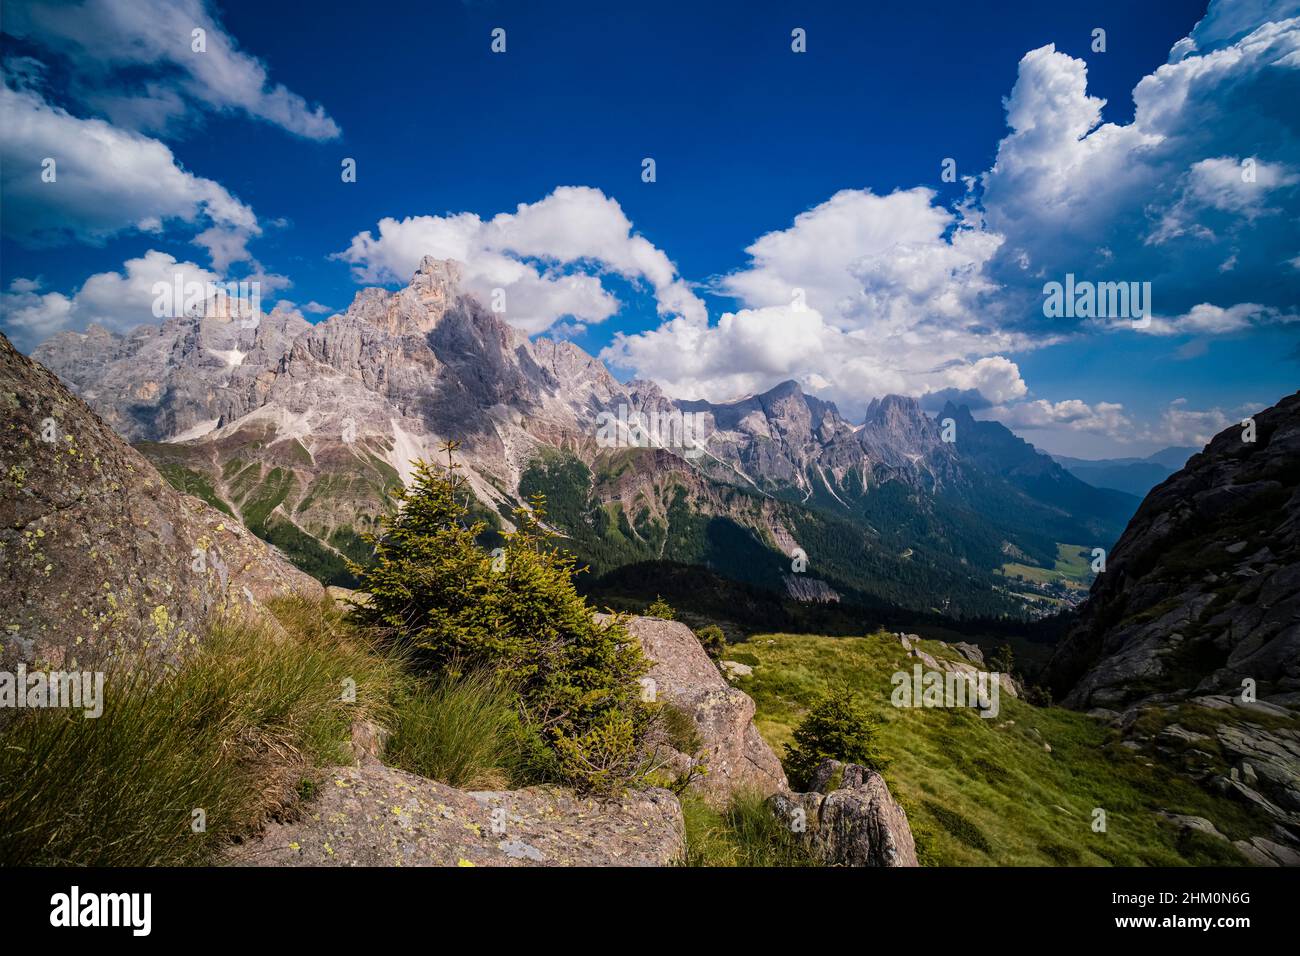 Summits and rock faces of the Pala group, Cimon della Pala, one of the main summits, standing out, seen from above Rolle Pass. Stock Photo